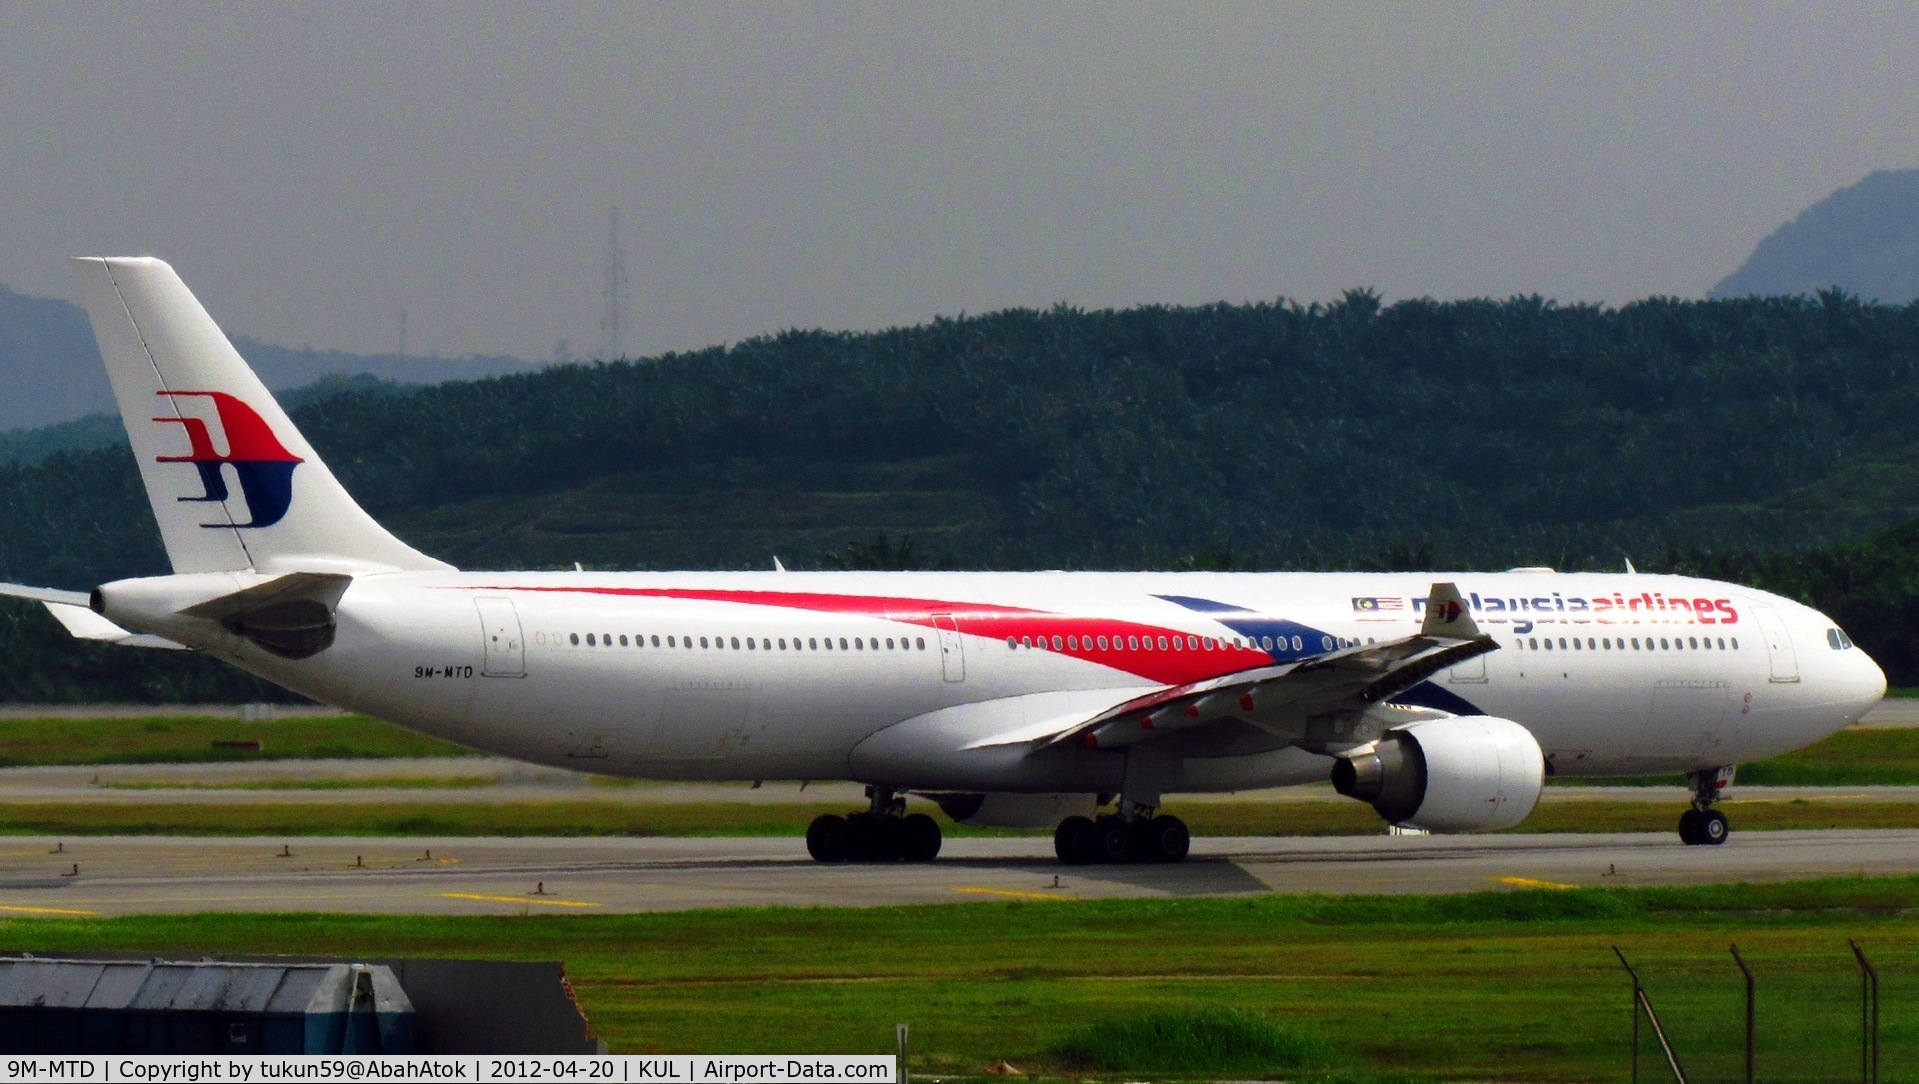 9M-MTD, 2011 Boeing A330-323X C/N 1234, Malaysia Airlines